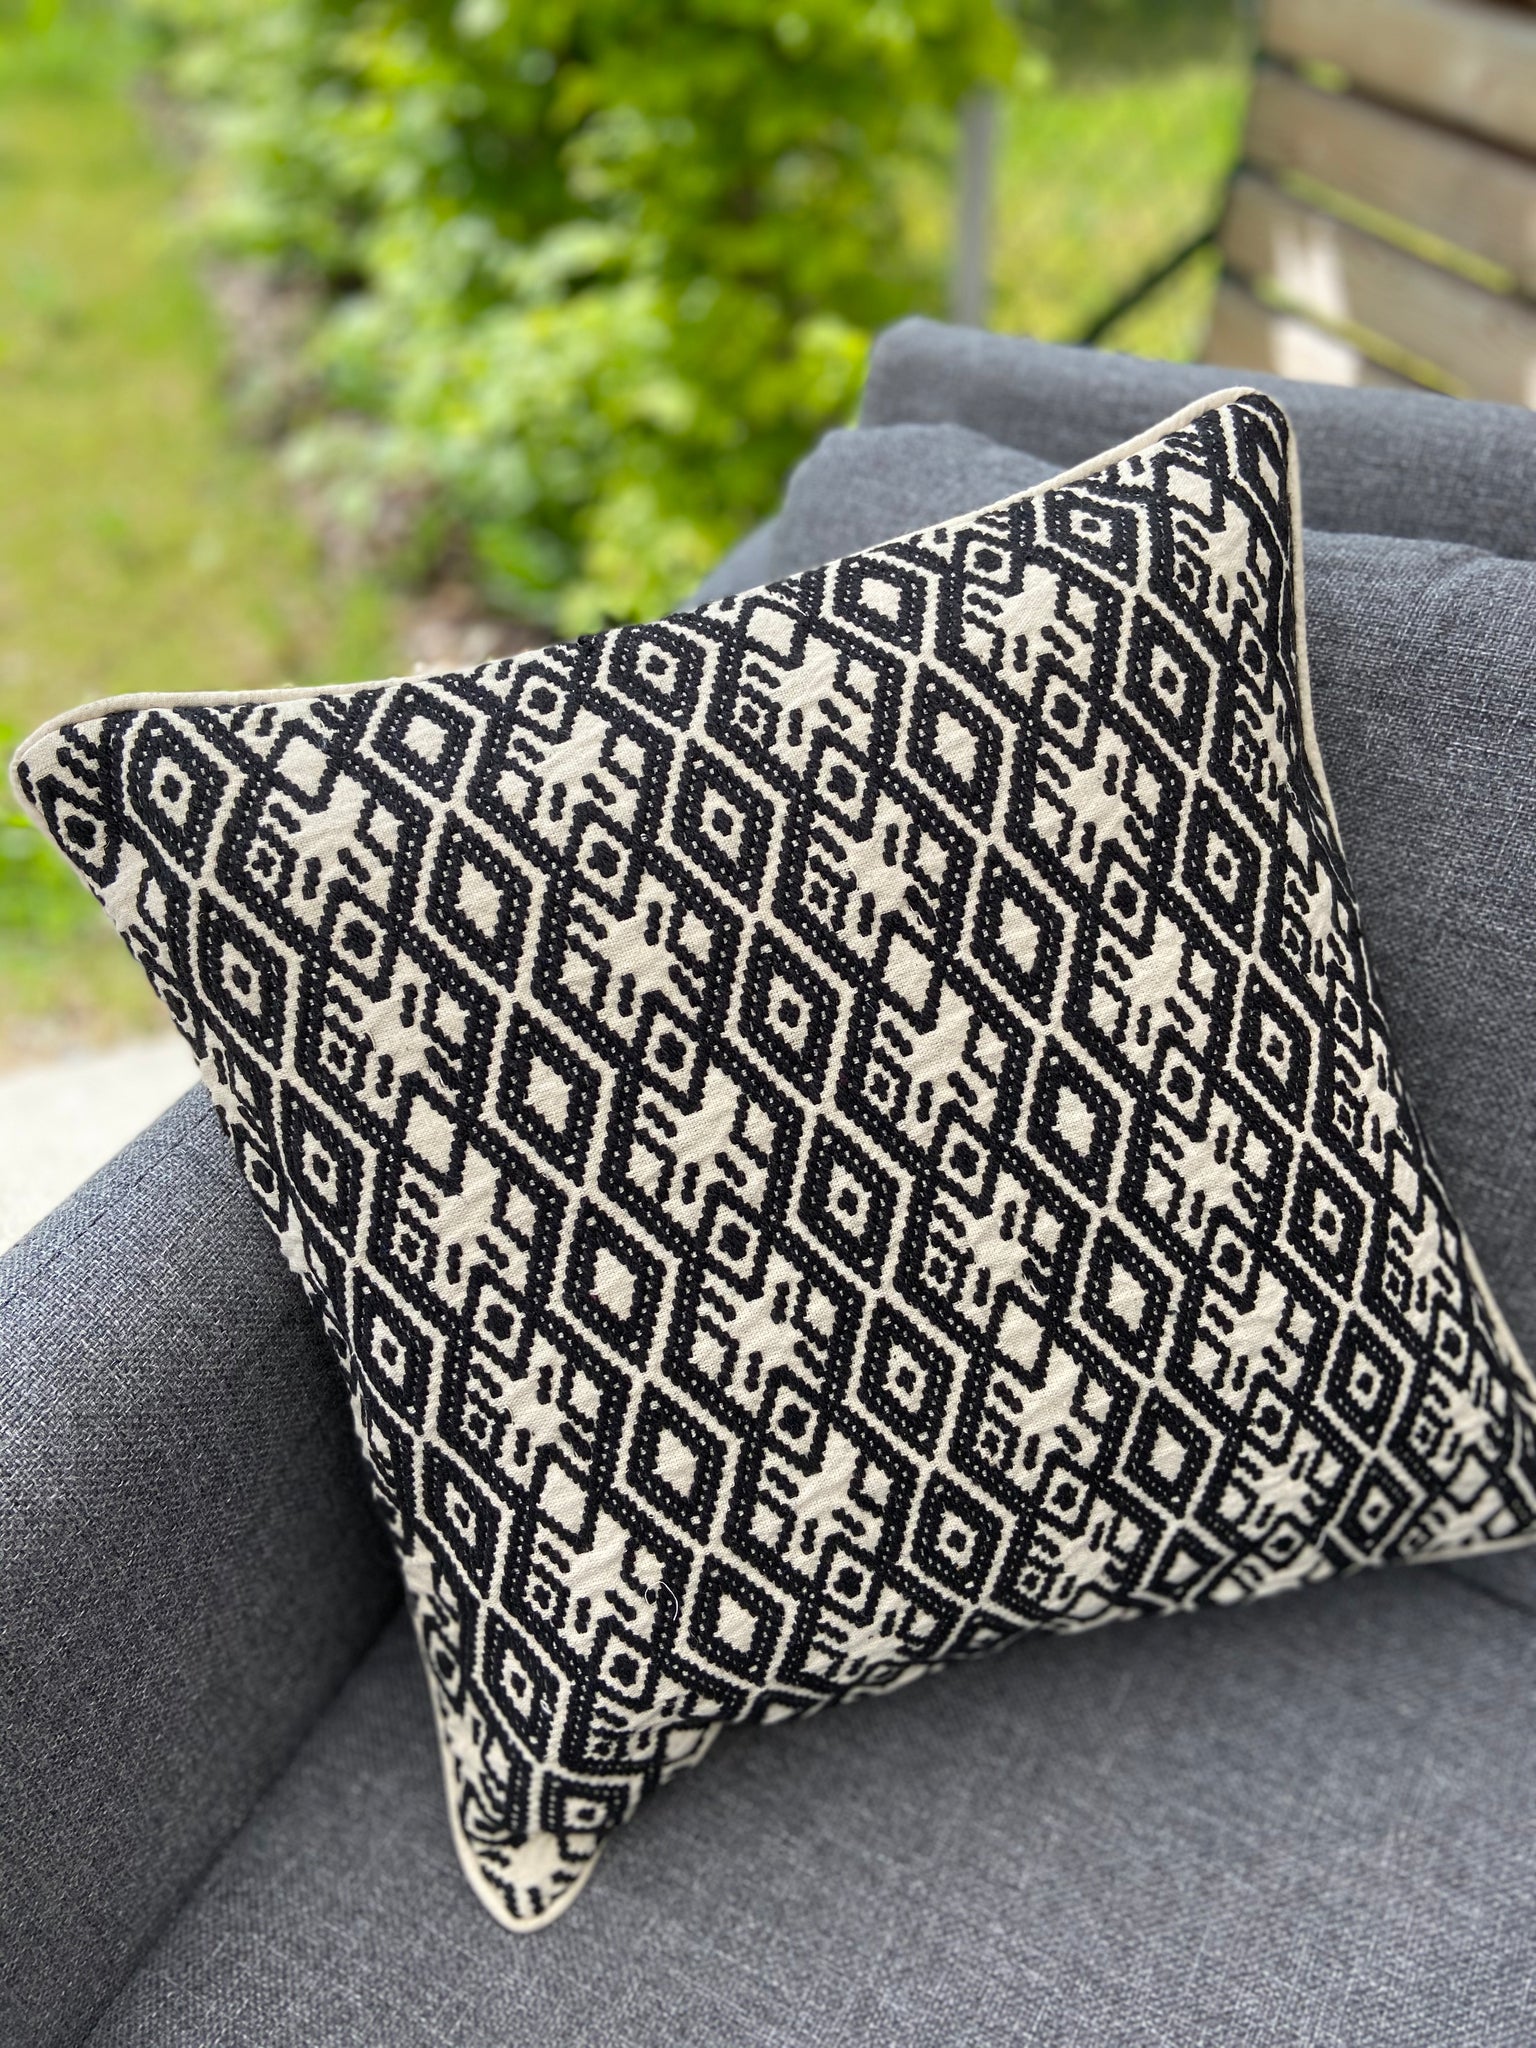 Cushion Cover-diamond pattern1 in black and white